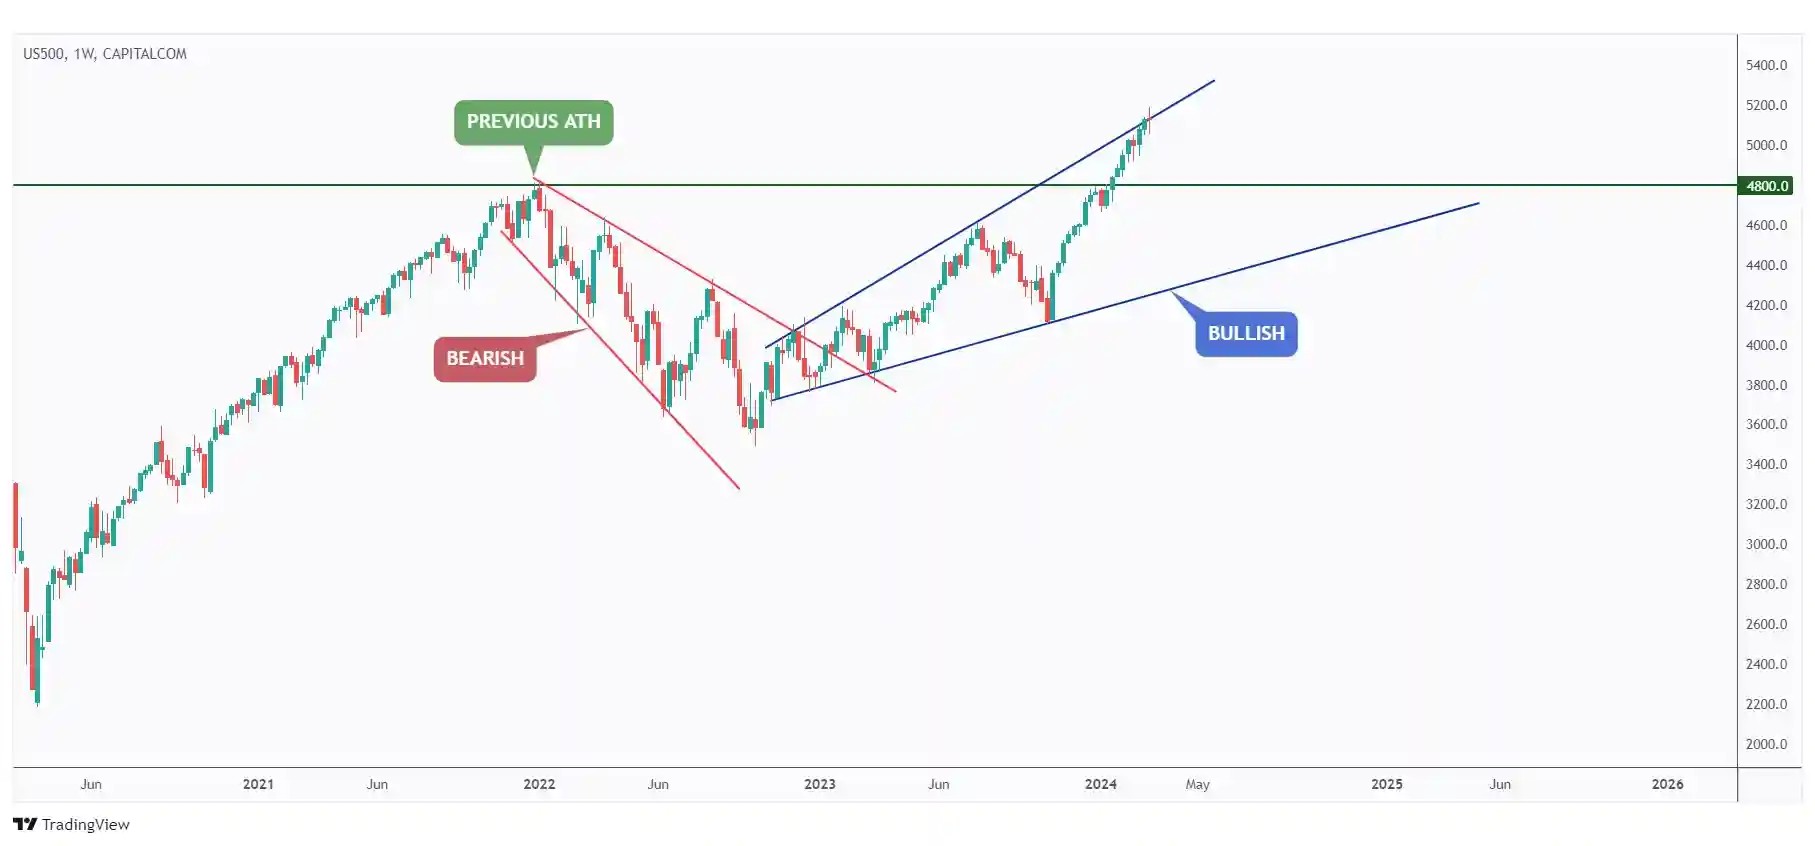 US500 weekly chart hovering around the upper bound of the wedge pattern.